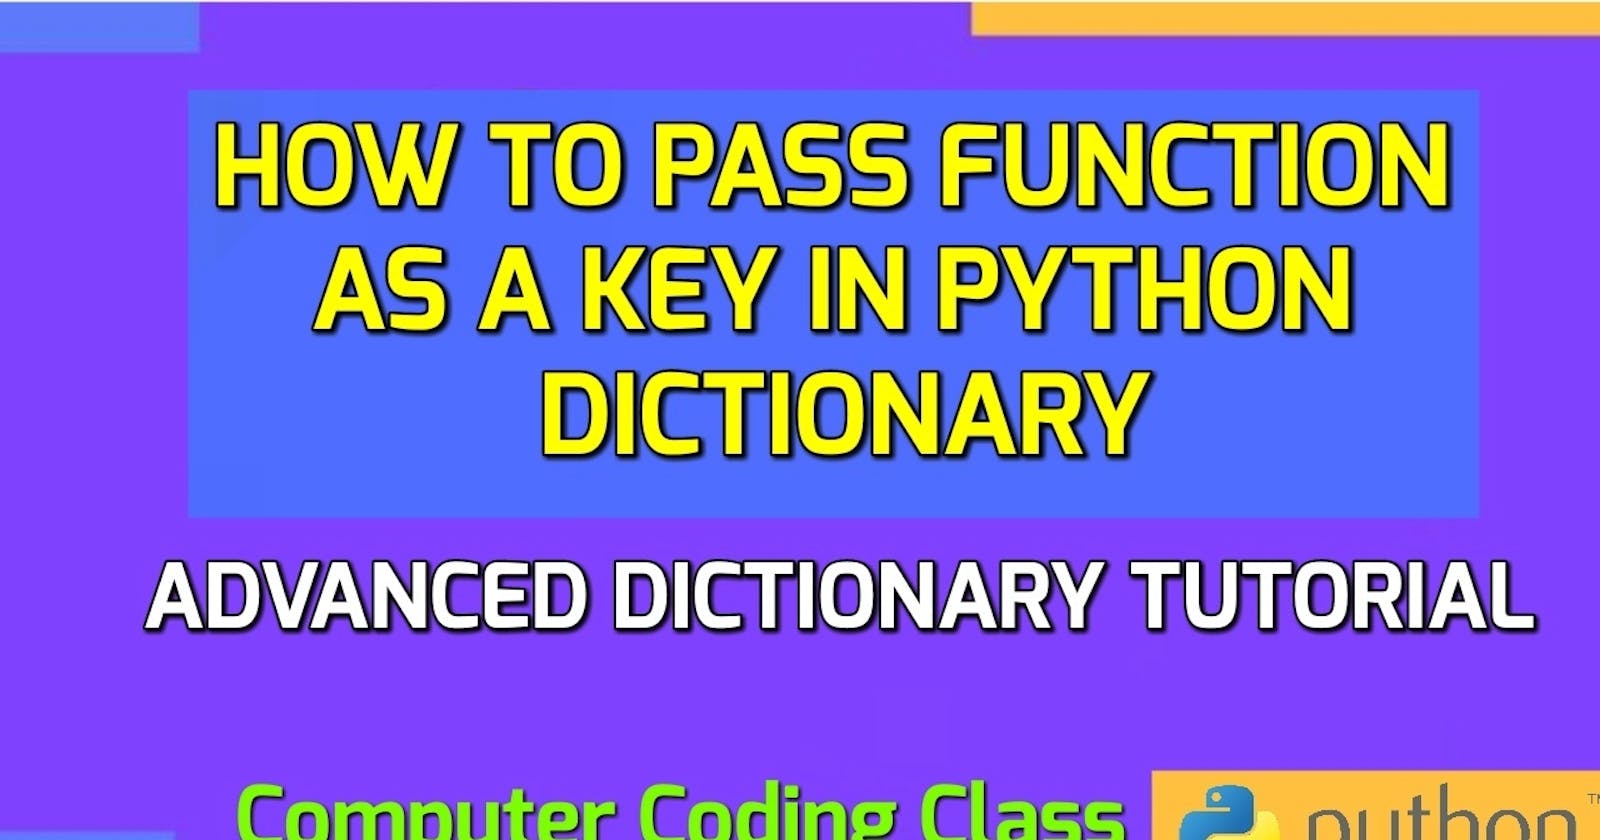 How to Use Function as Dictionary Key in Python